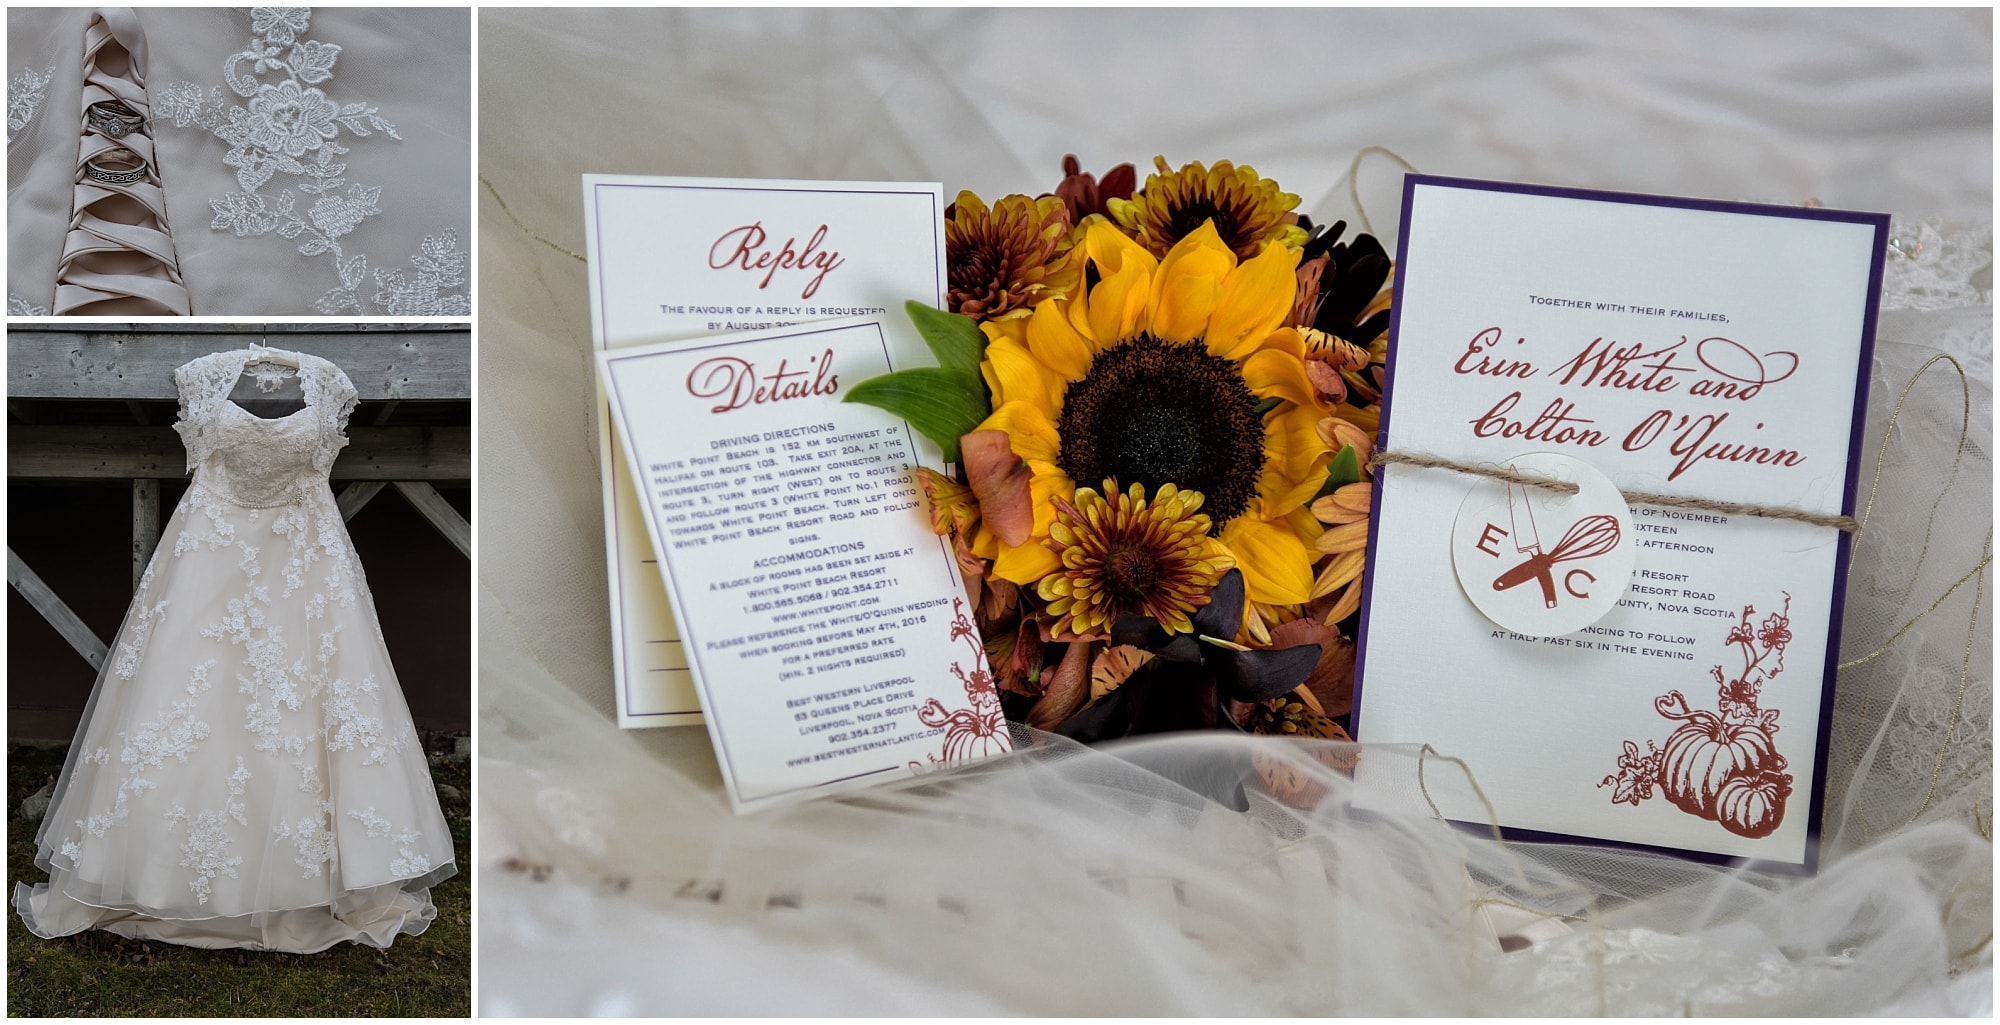 The bride's wedding gown with her wedding invitation and sunflower bridal bouquet.